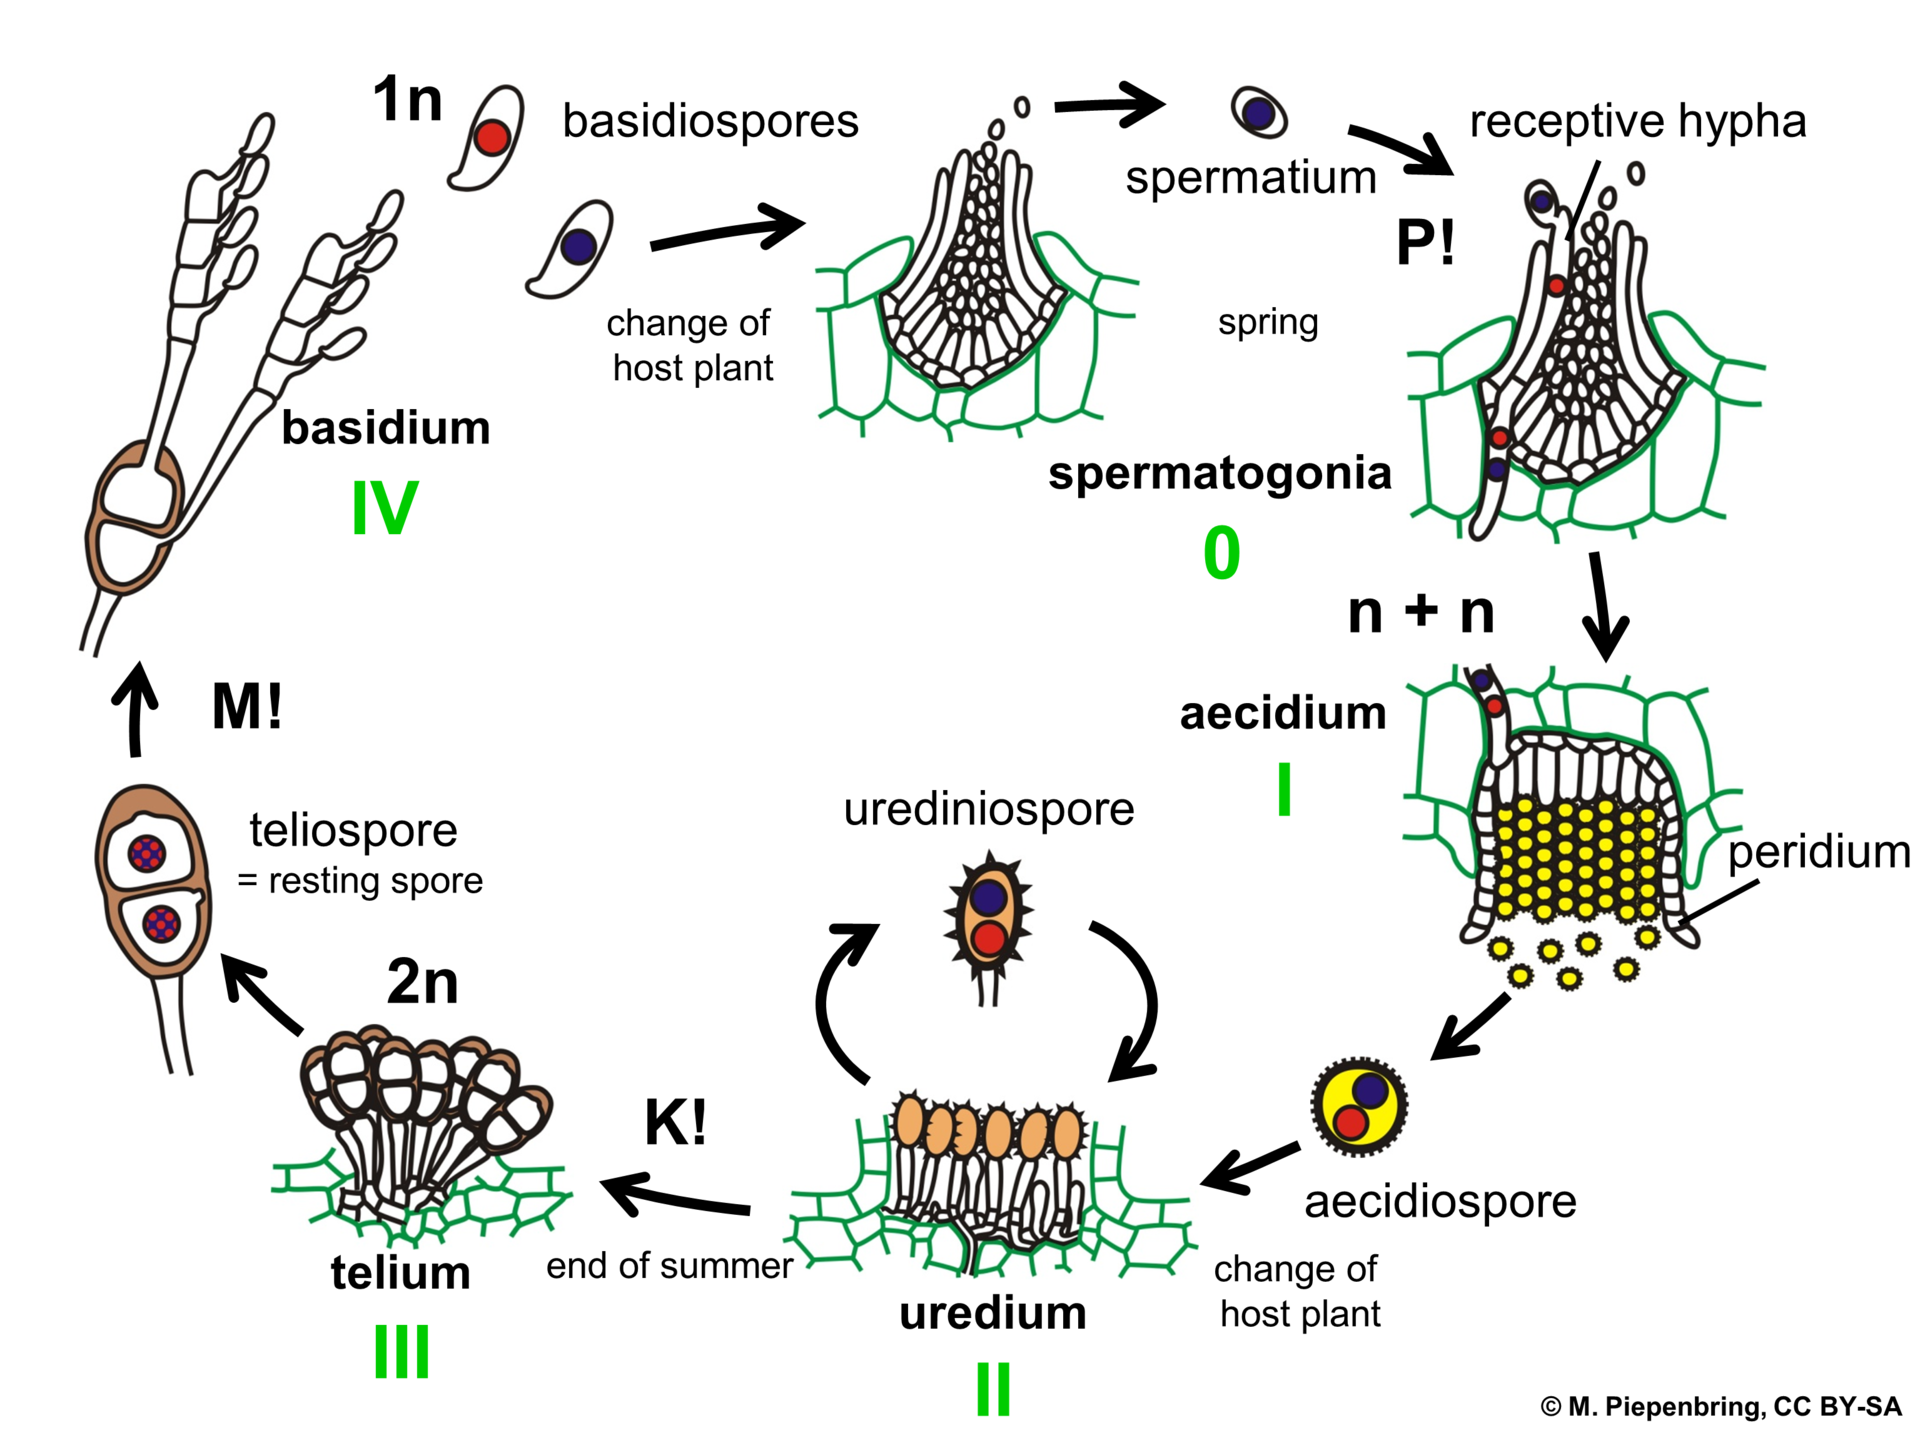 The general life cycle of fungi in Pucciniomycotina